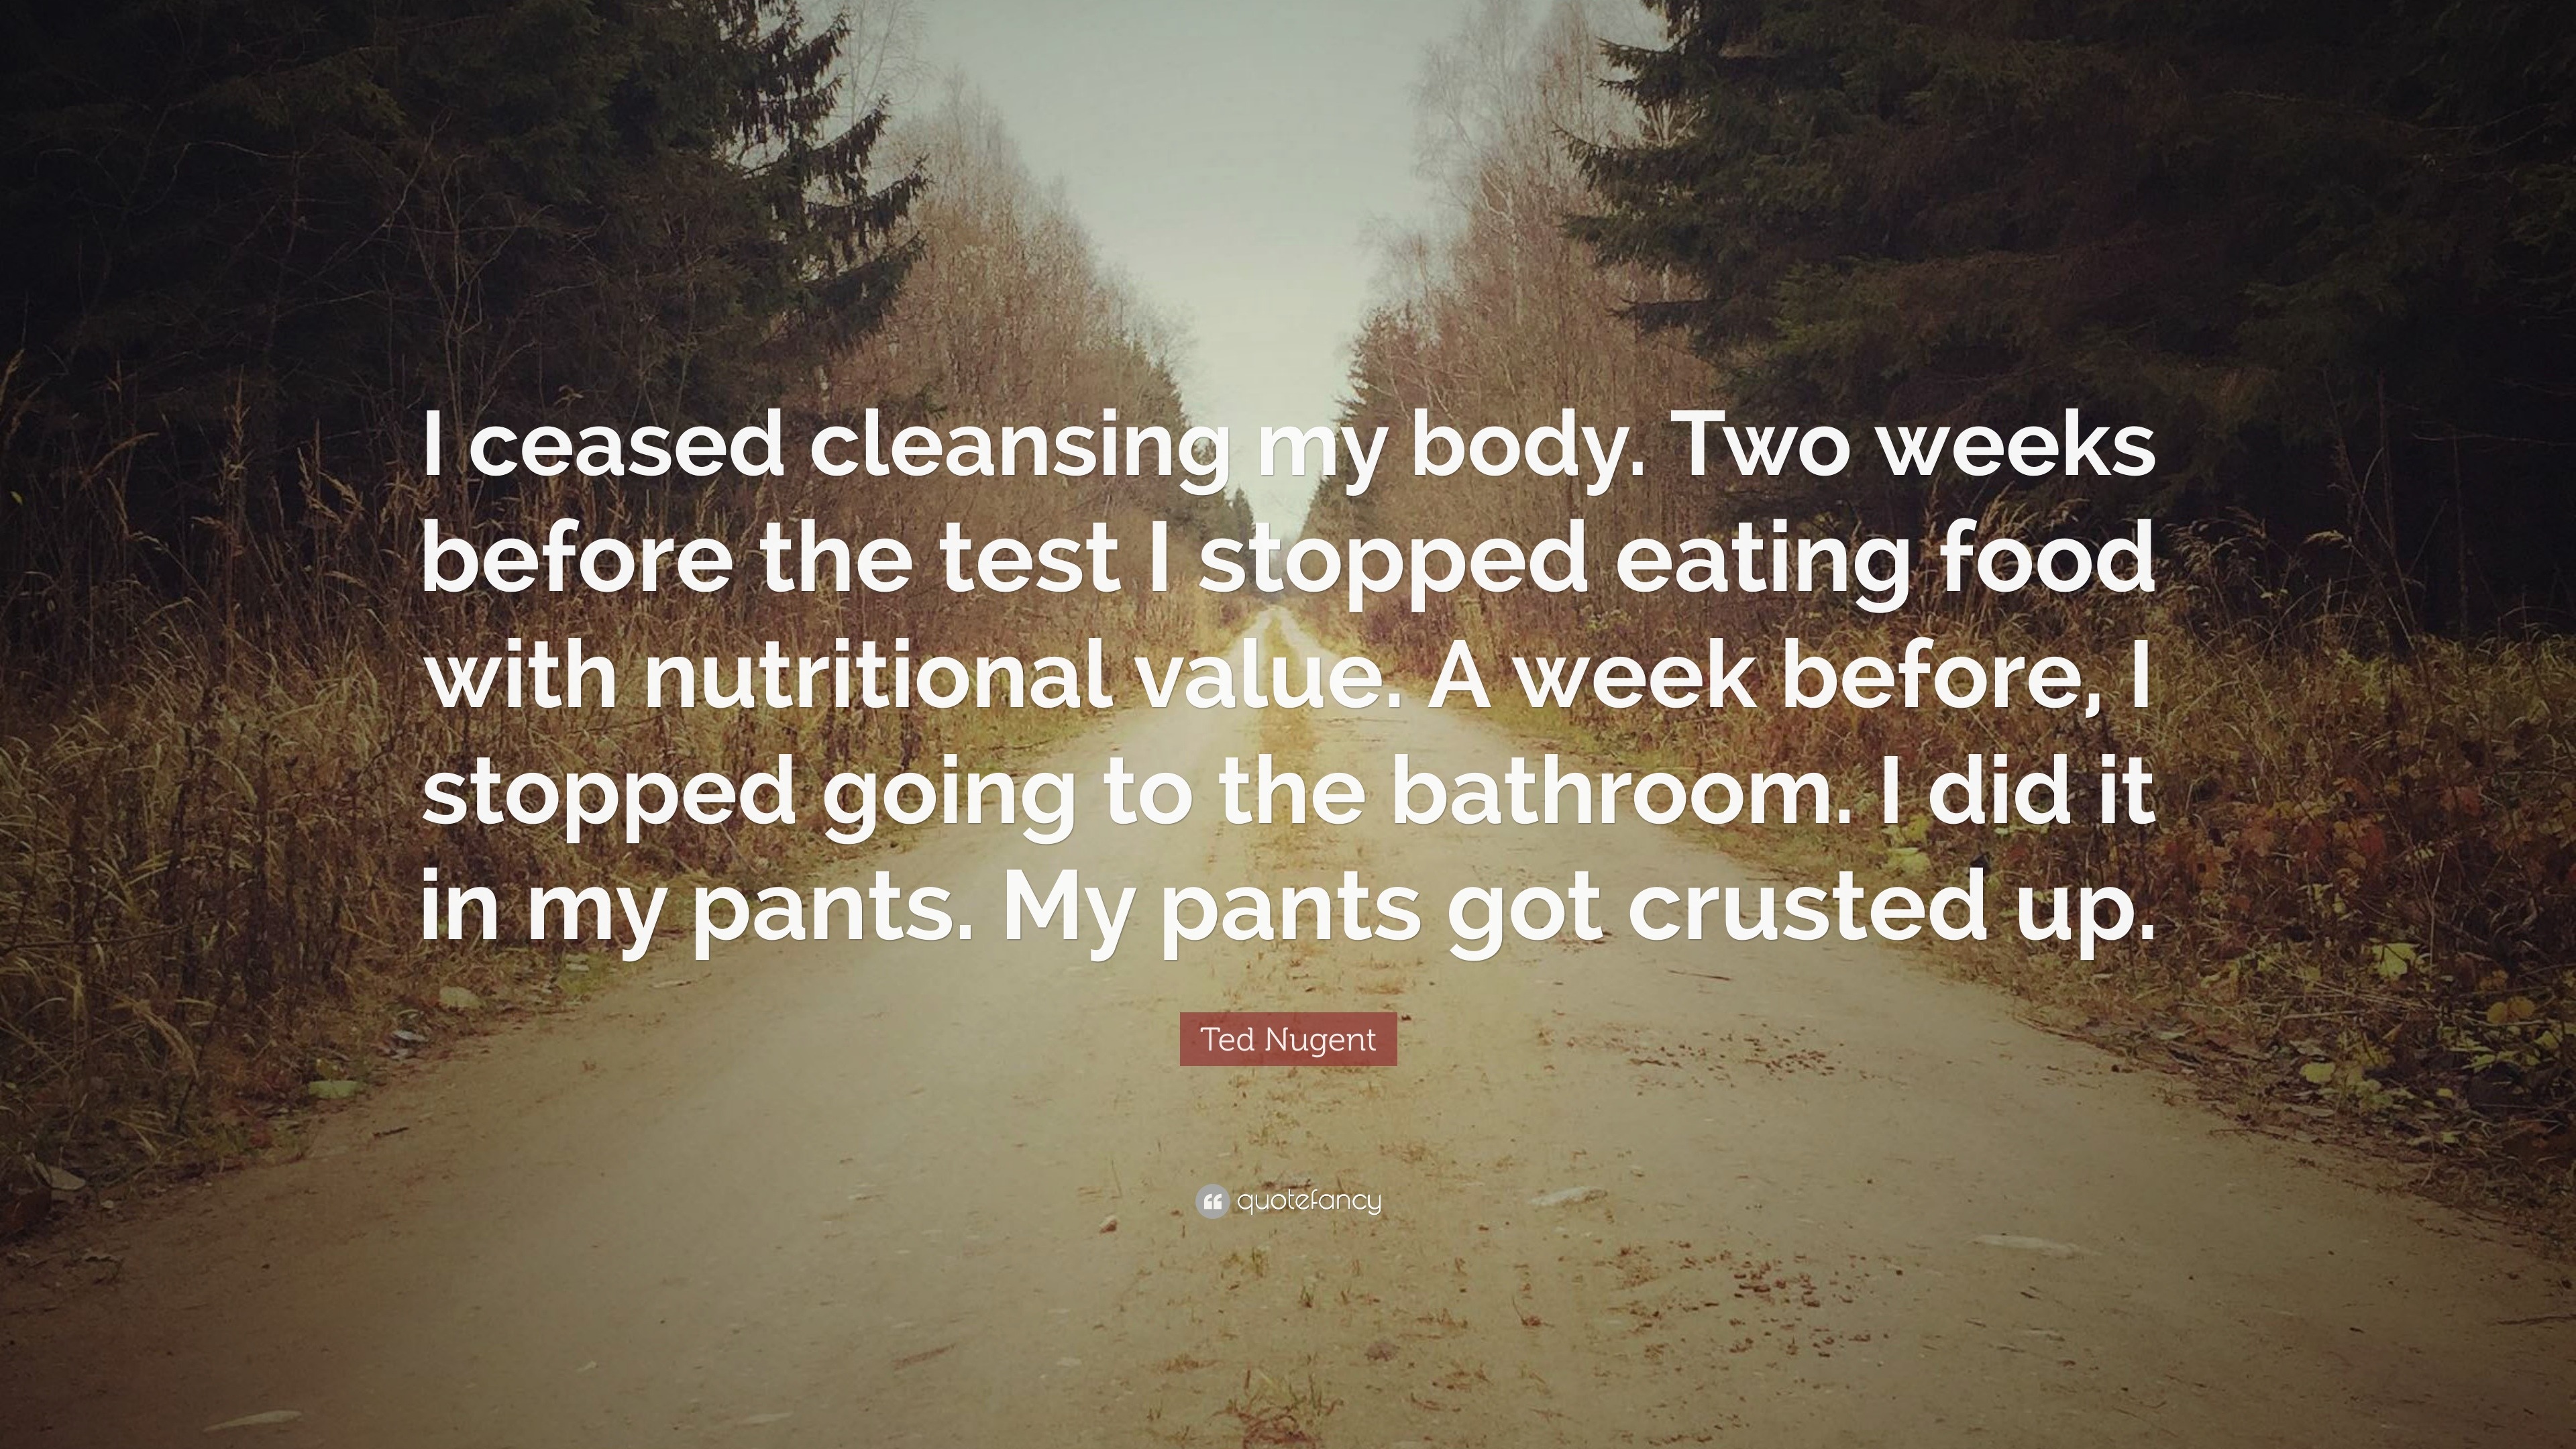 Ted Nugent Quote: “I ceased cleansing my body. Two weeks before the